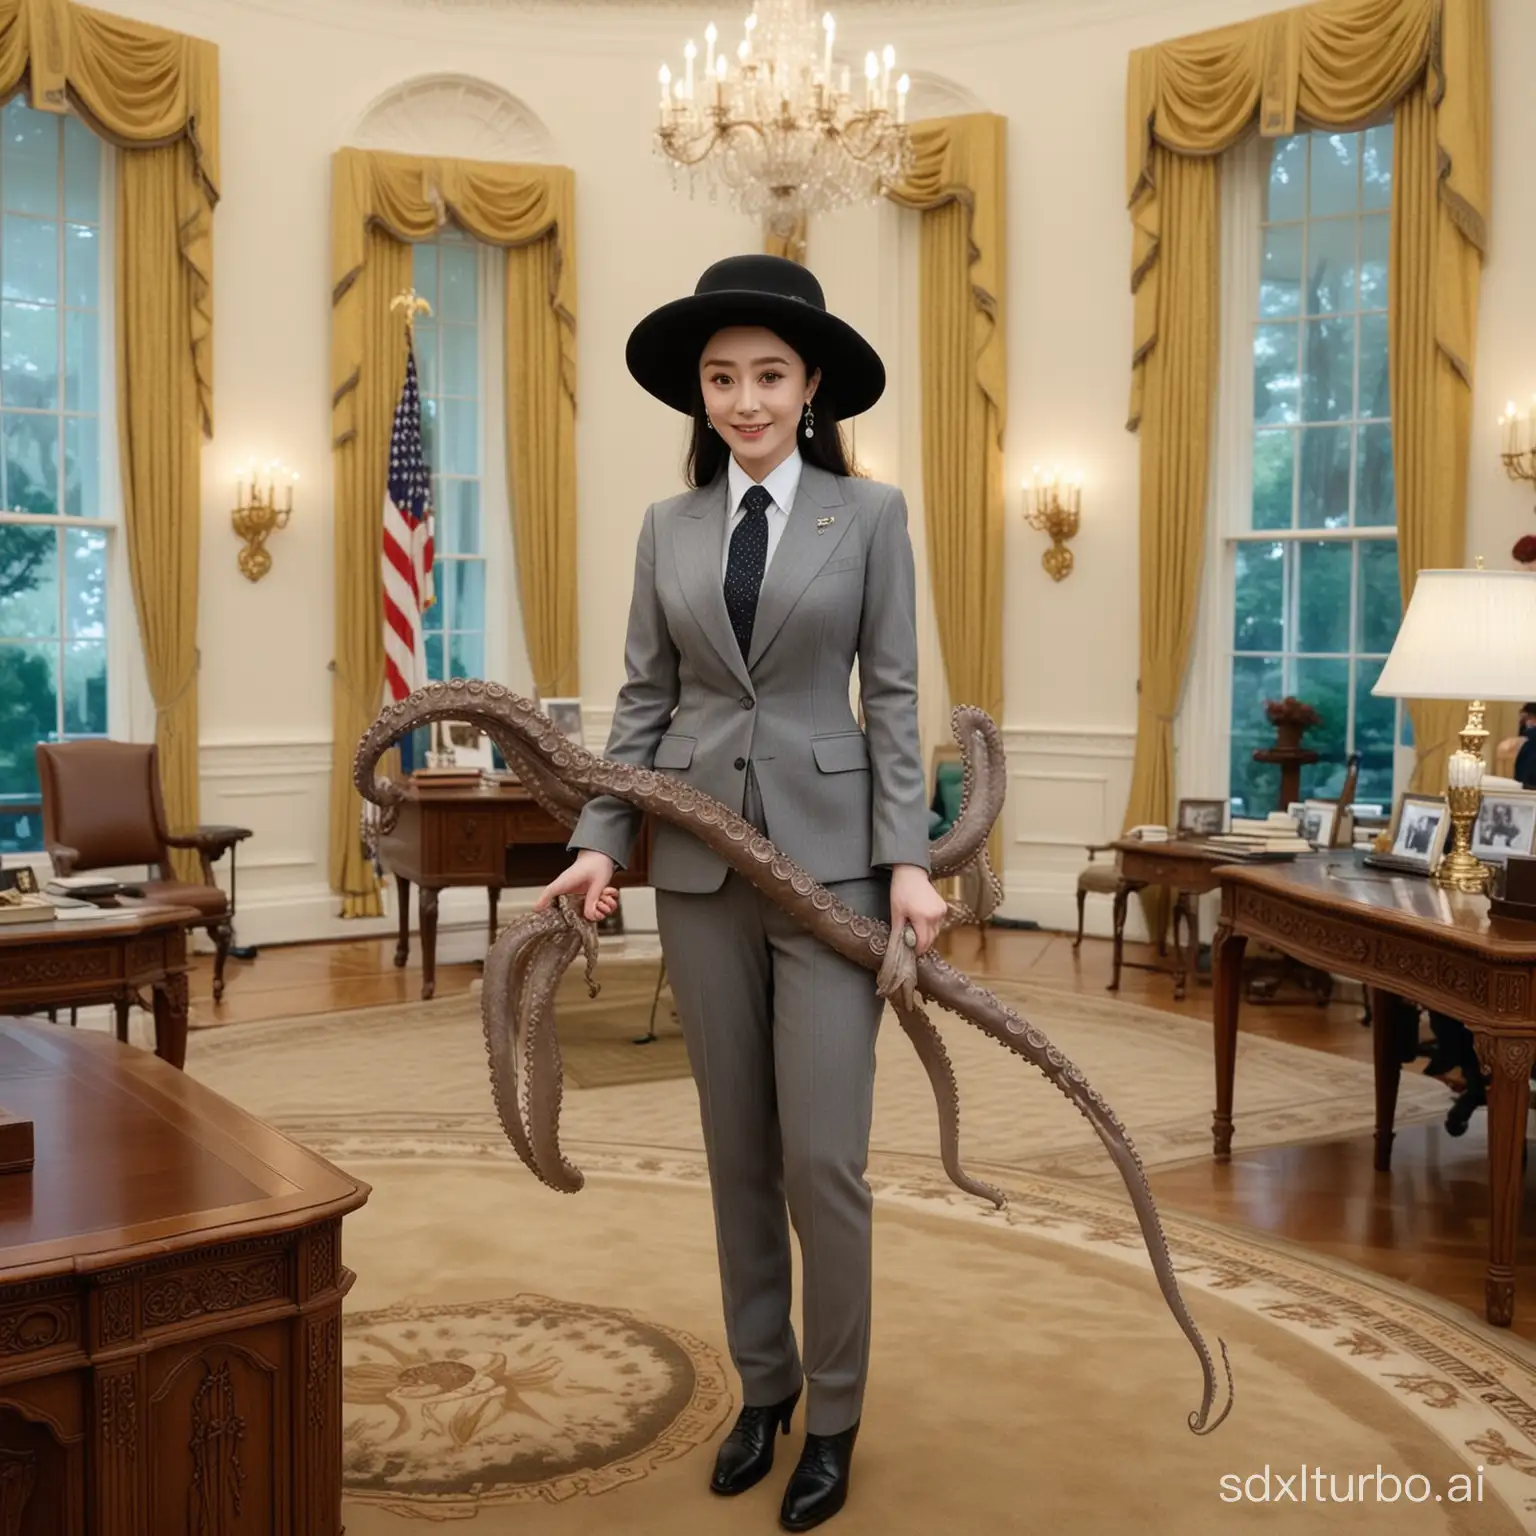 Fan Bingbing is wearing a gray suit, welcoming a very lifelike sticky octopus in the Oval Office of the White House. The octopus wears a top hat and carries a cane, very happy to see this sticky octopus. He wants to award this sticky, wet octopus an honorary medal. Fan Bingbing and the sticky, wet octopus are very clean, high-resolution lifelike human renderings.